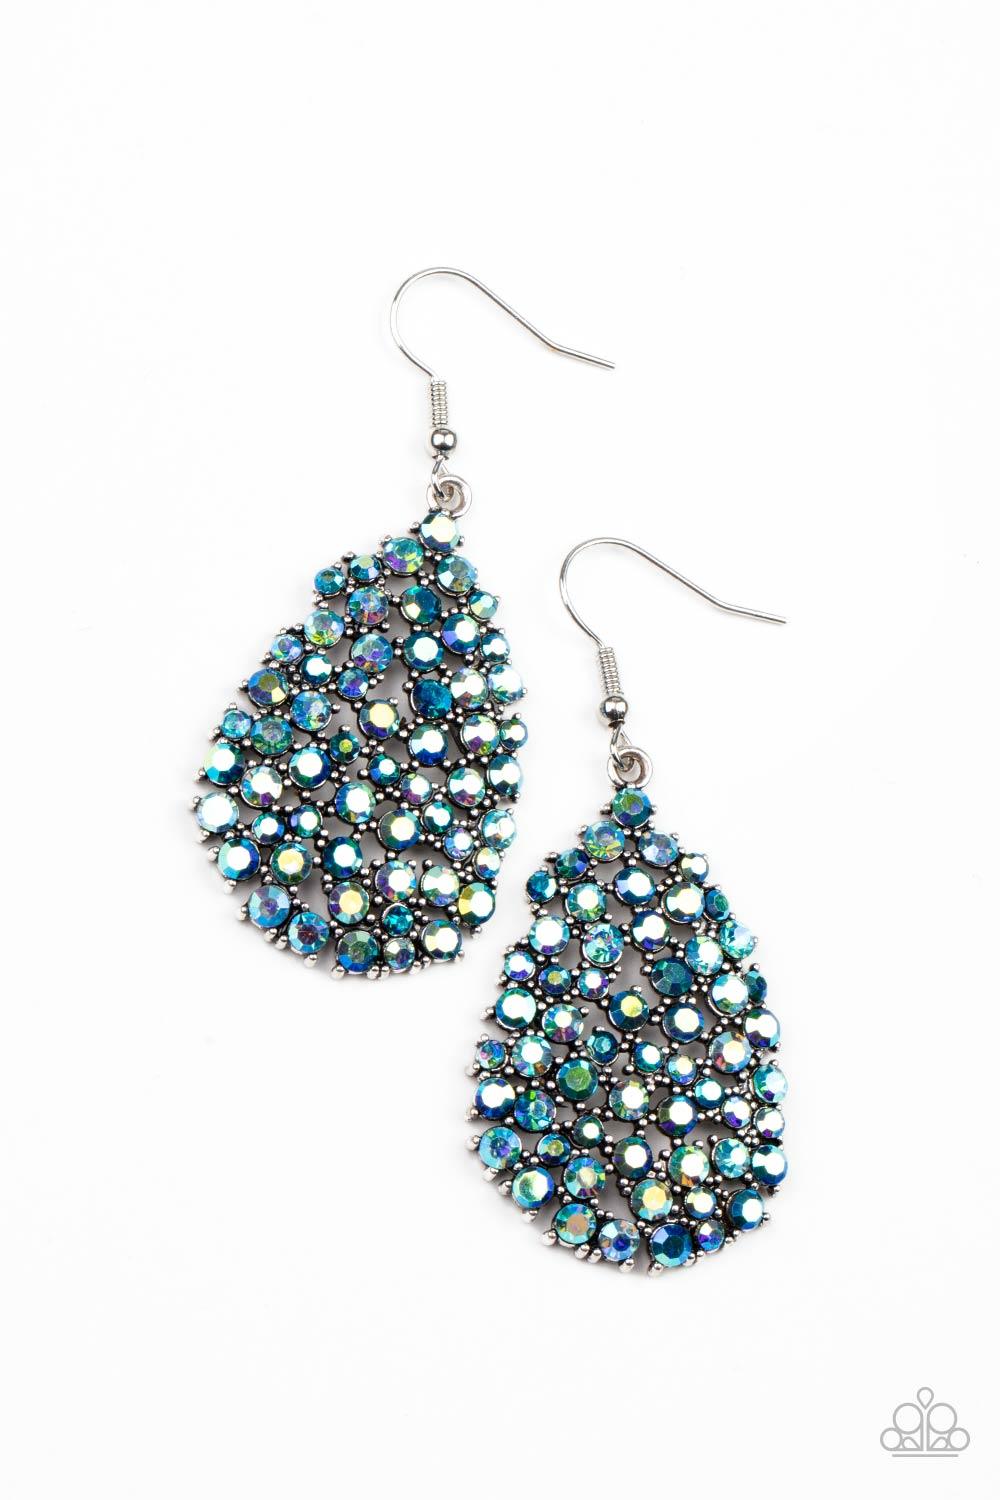 Paparazzi Accessories Daydreamy Dazzle - Multi Featuring studded silver fittings, a smoldering collection of iridescent rhinestones coalesce into a dazzling teardrop frame. Earring attaches to a standard fishhook fitting. Sold as one pair of earrings. Jew